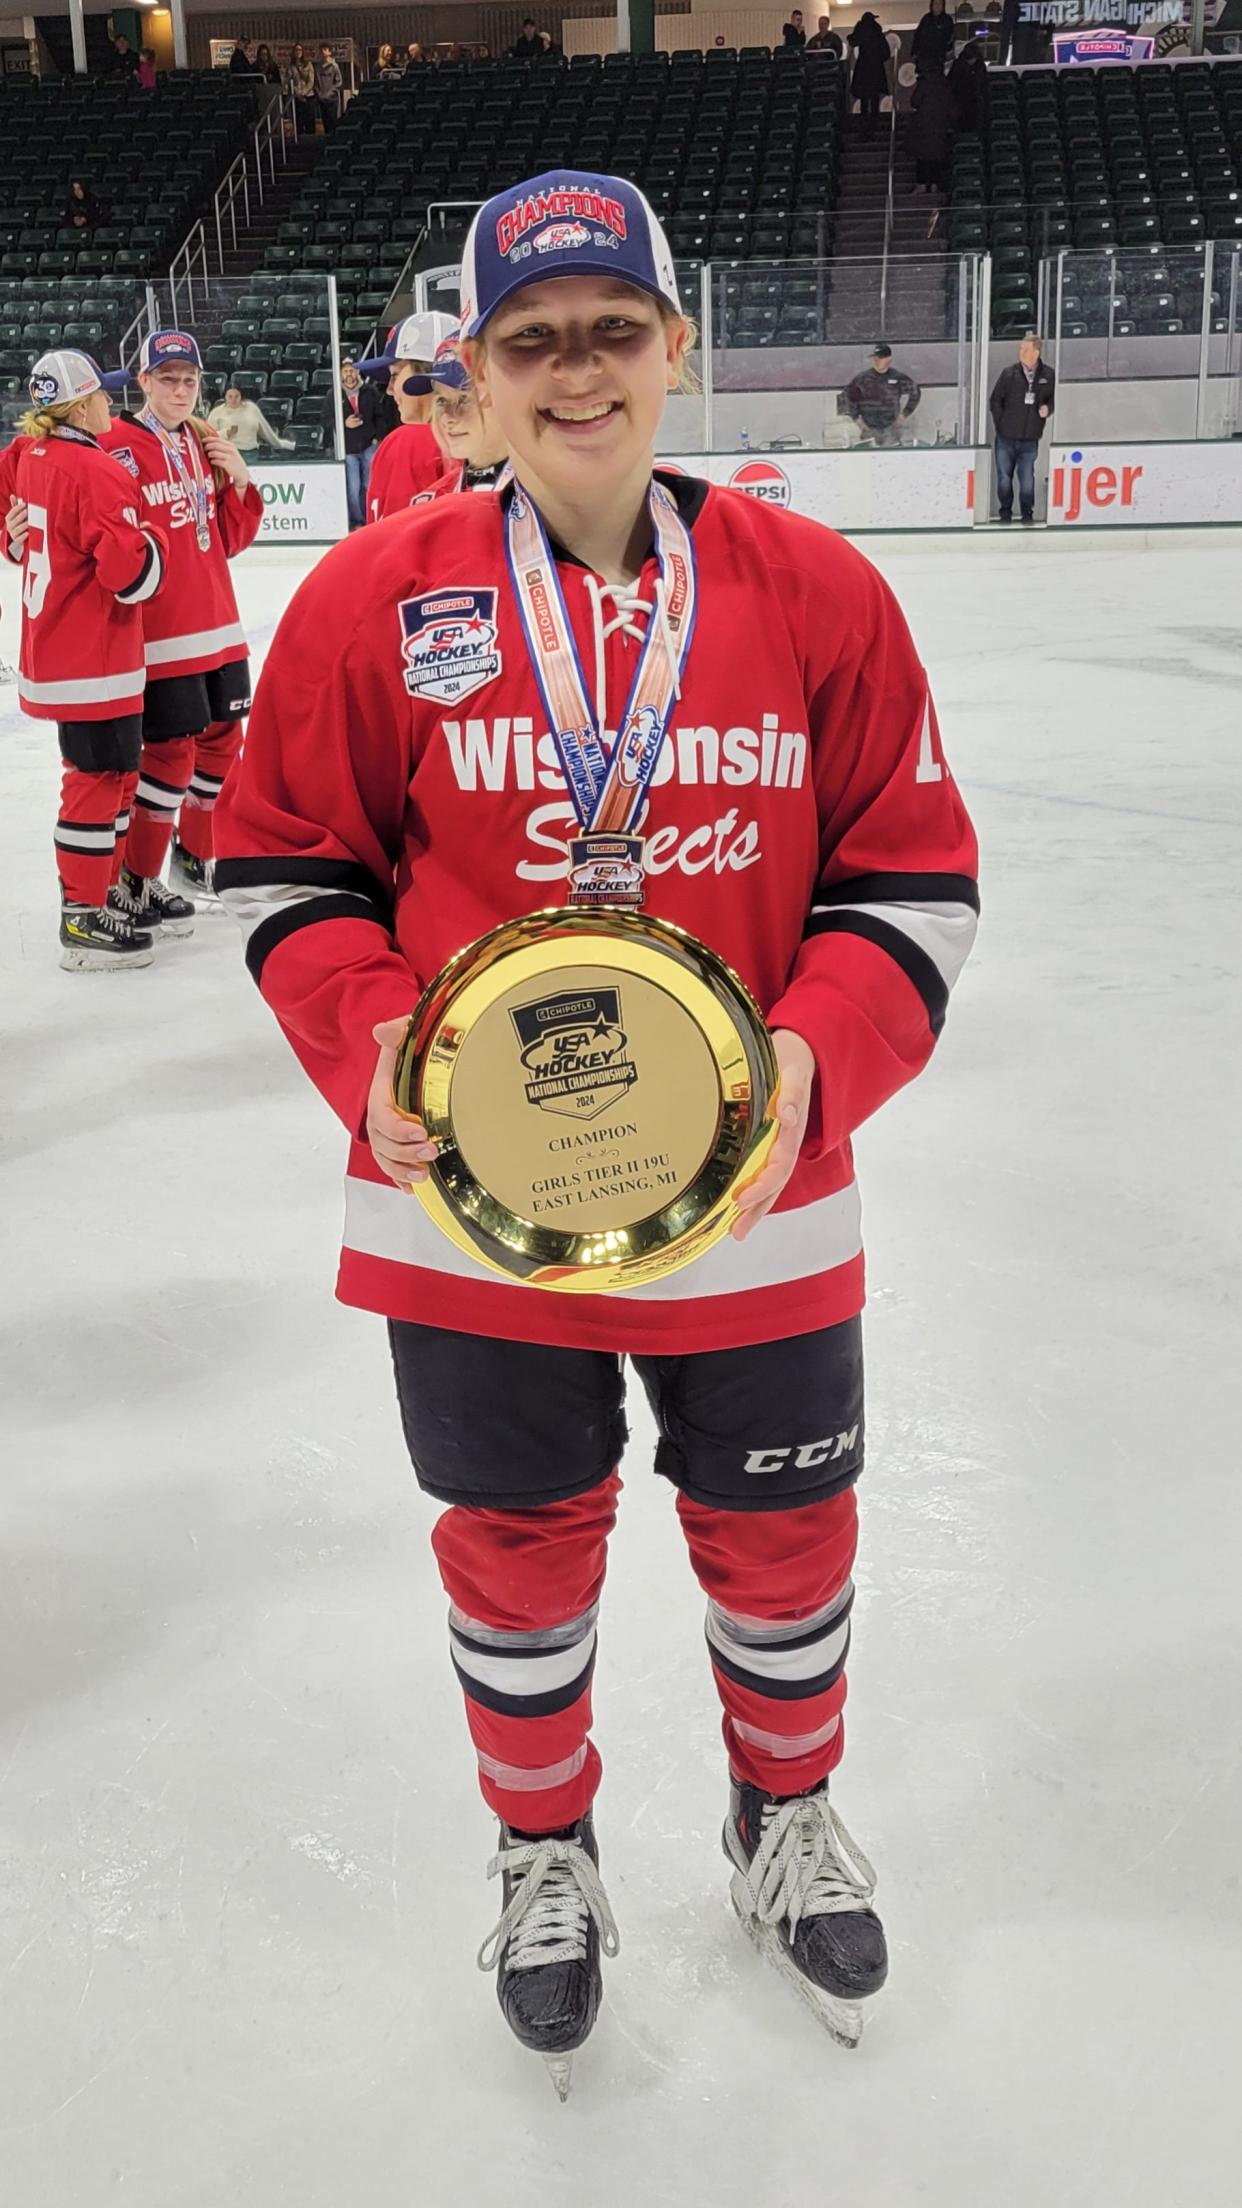 Kayla Dogs, a Sheboygan North sophomore, won the Tier II 2A USA Hockey National Championship last month with her club team, the Wisconsin Selects.